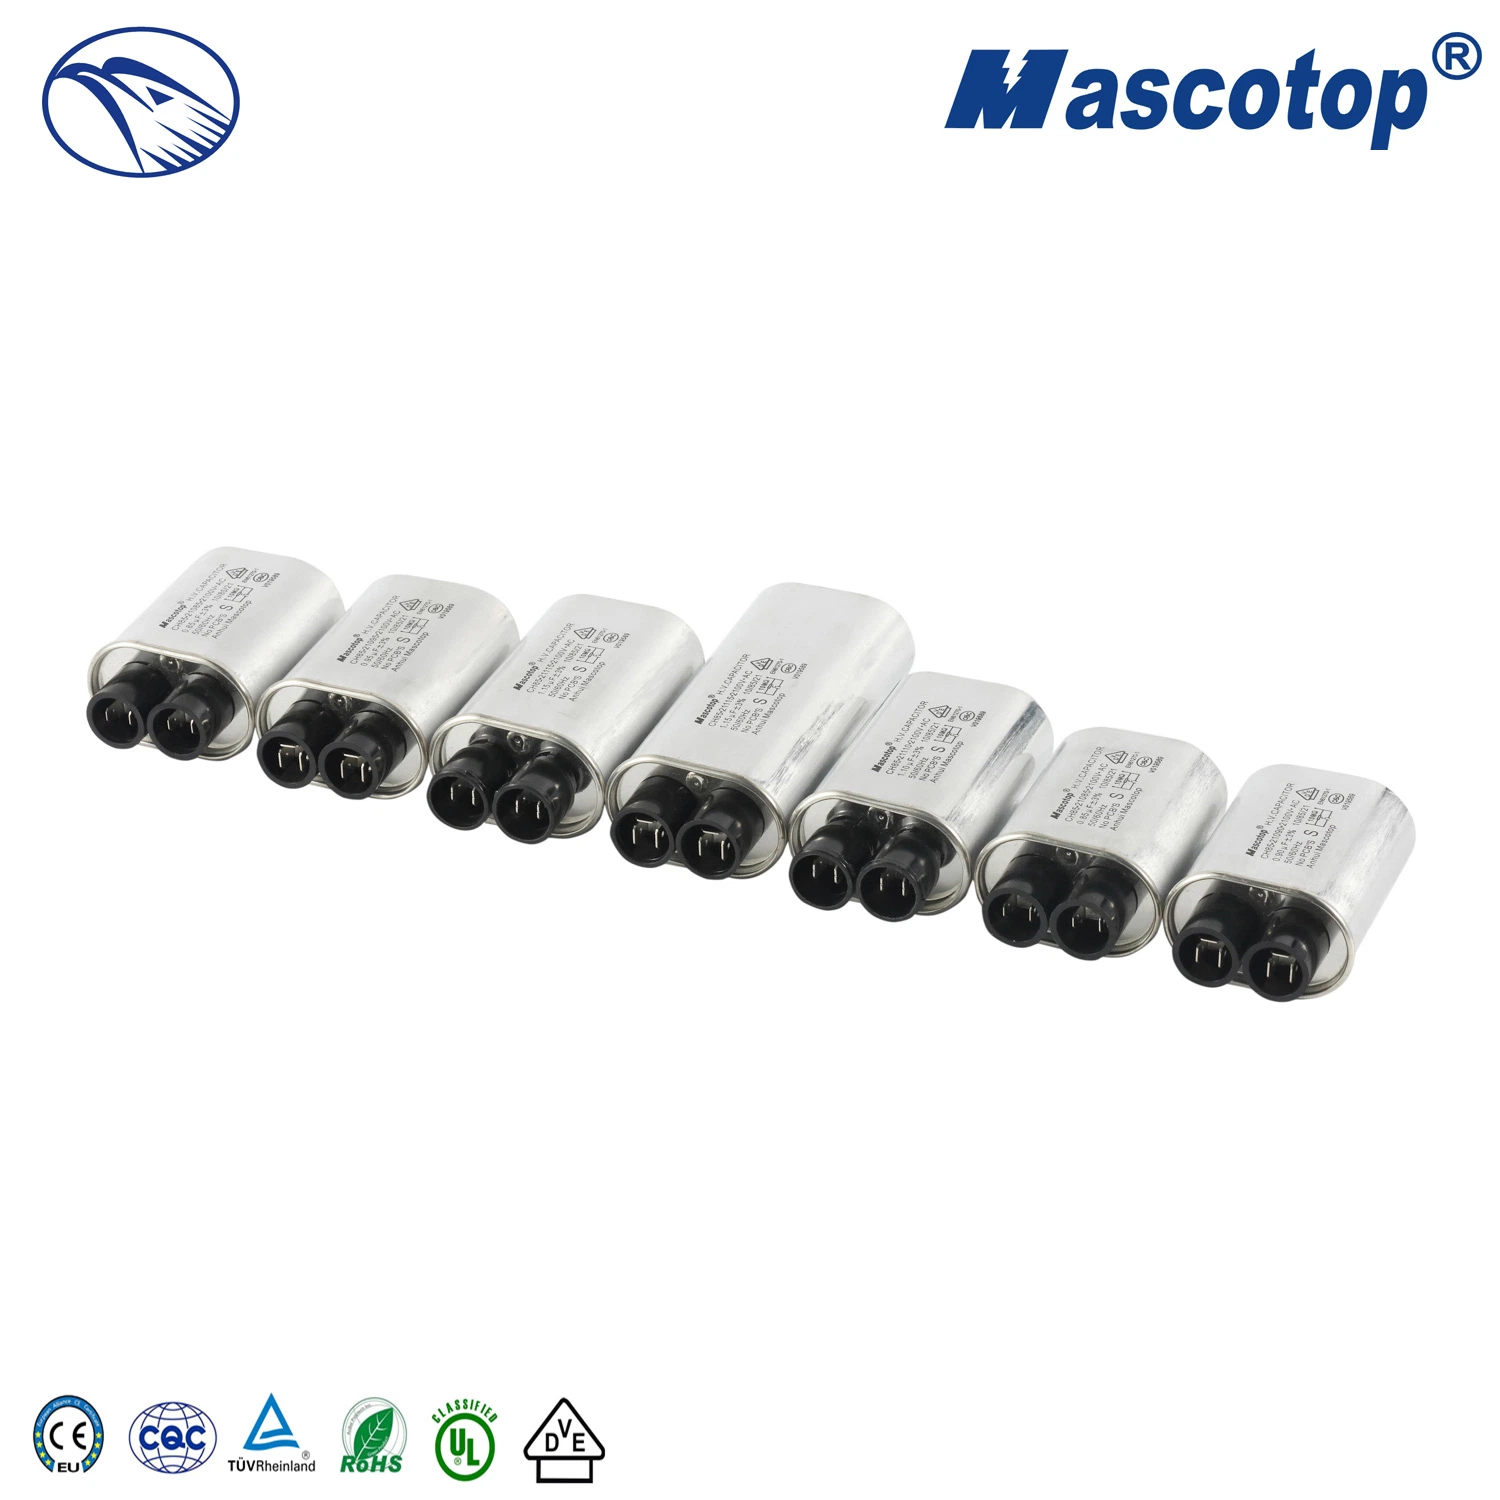 AC / Motor Surface Mount Mascotop Super High Voltage Capacitor